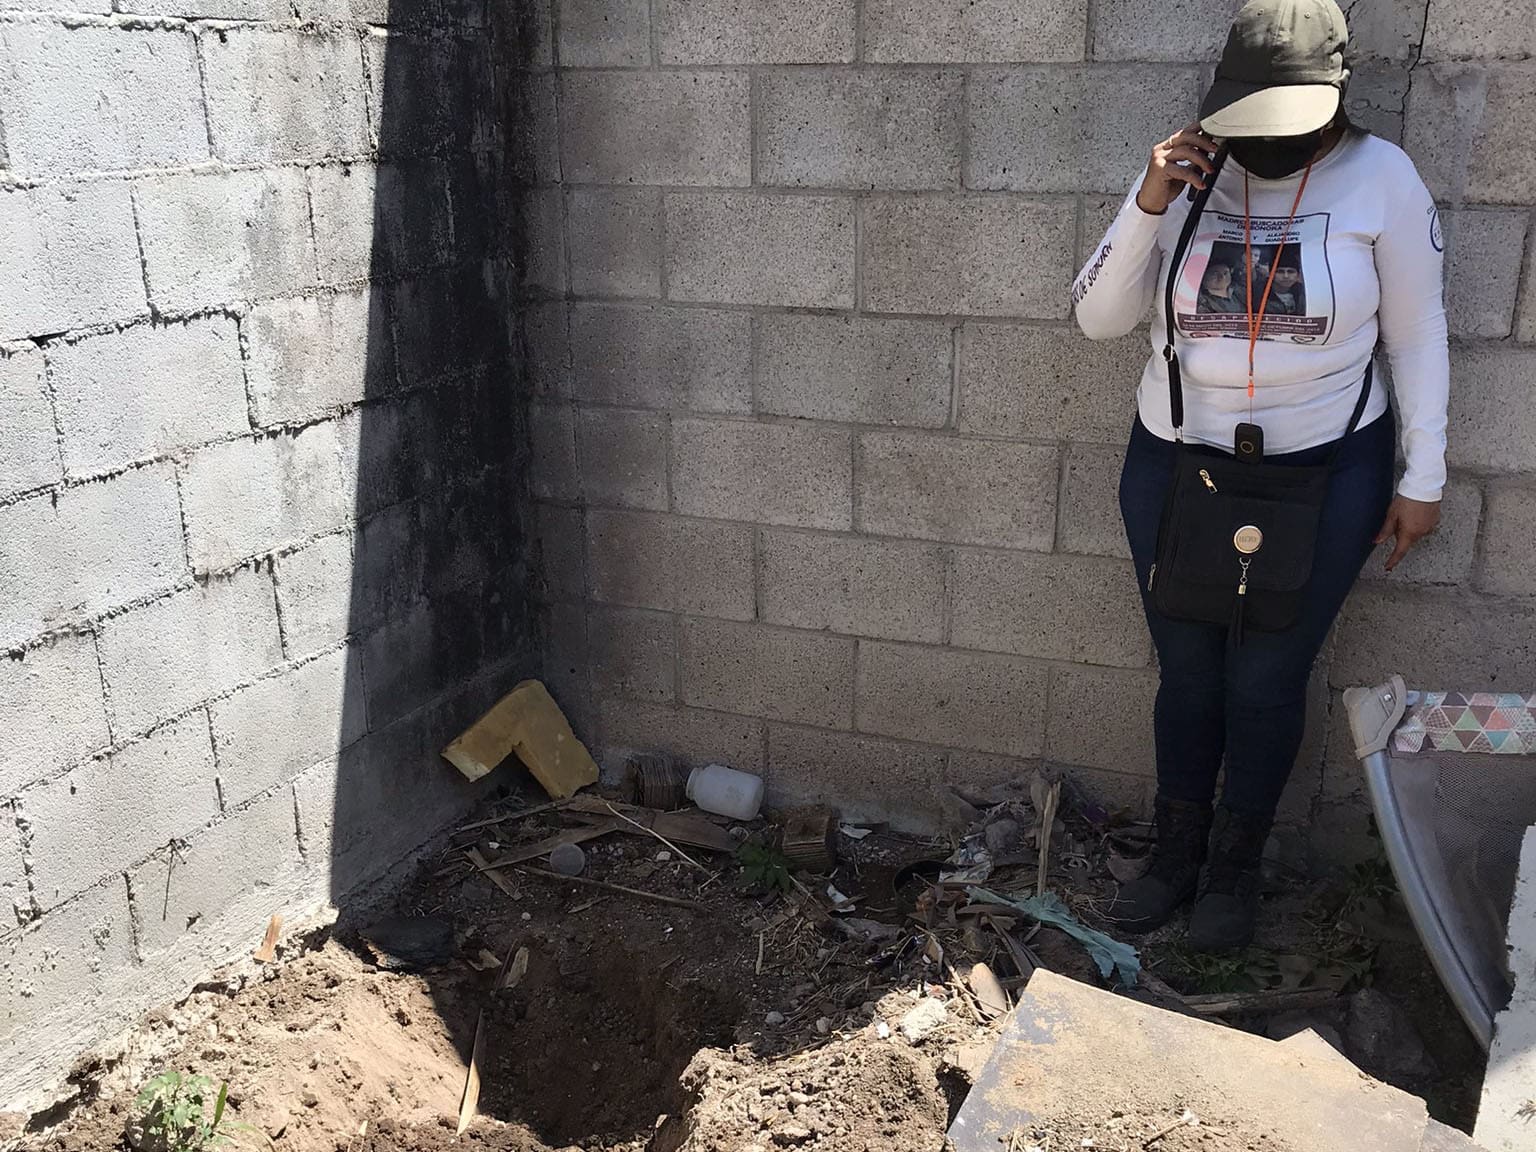 Mother finds mass graves in Mexico, in search of her sons kidnapped by cartel